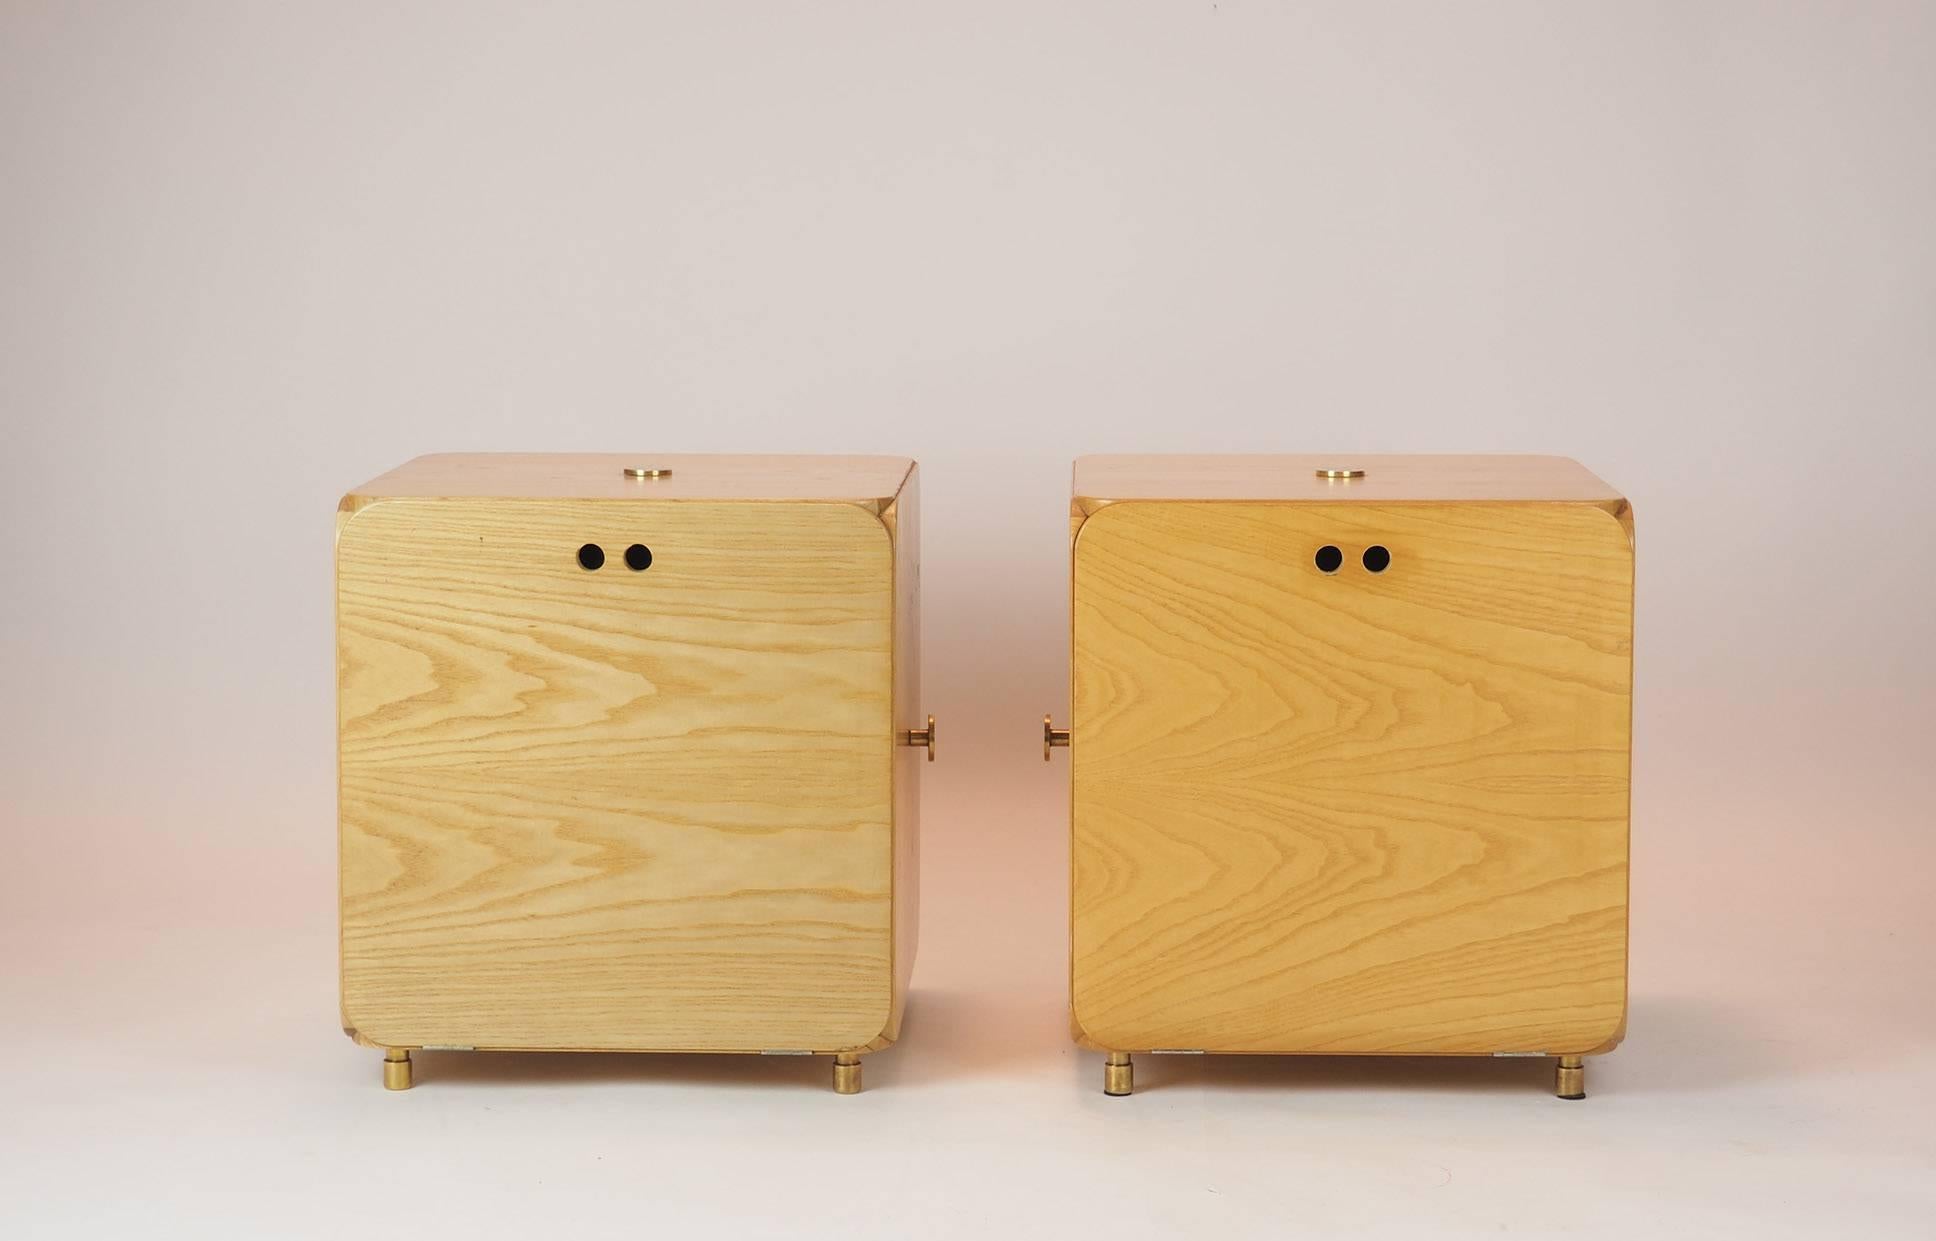 Turned Pair of  wood 'Cube' Cabinet  Nightstands Produced  in Italy by Maisa in  1969